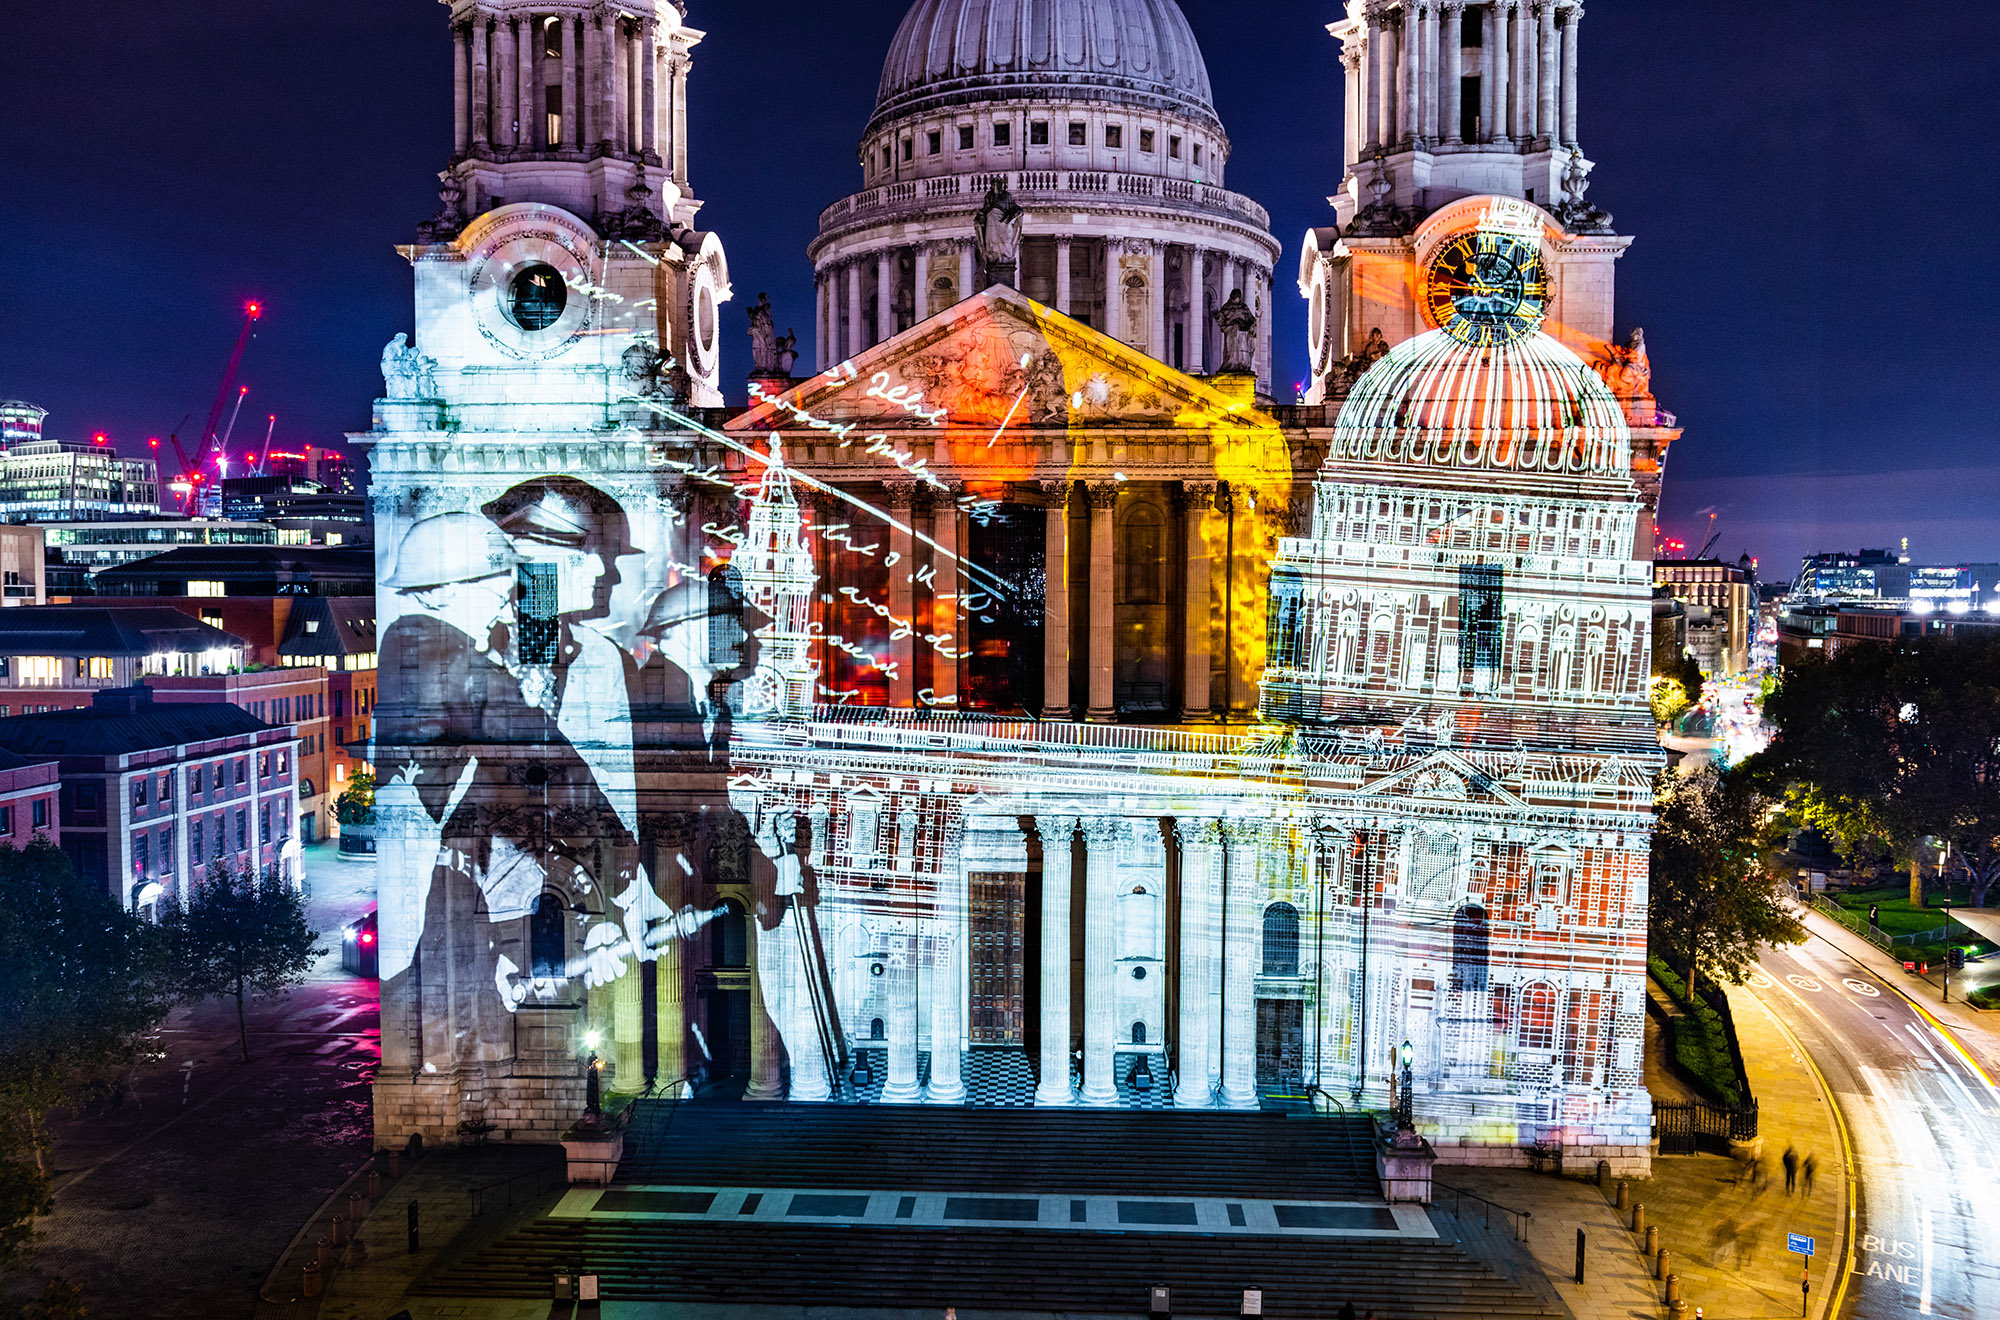 Where Light Falls, Projection mapping show on St Paul's Cathedral